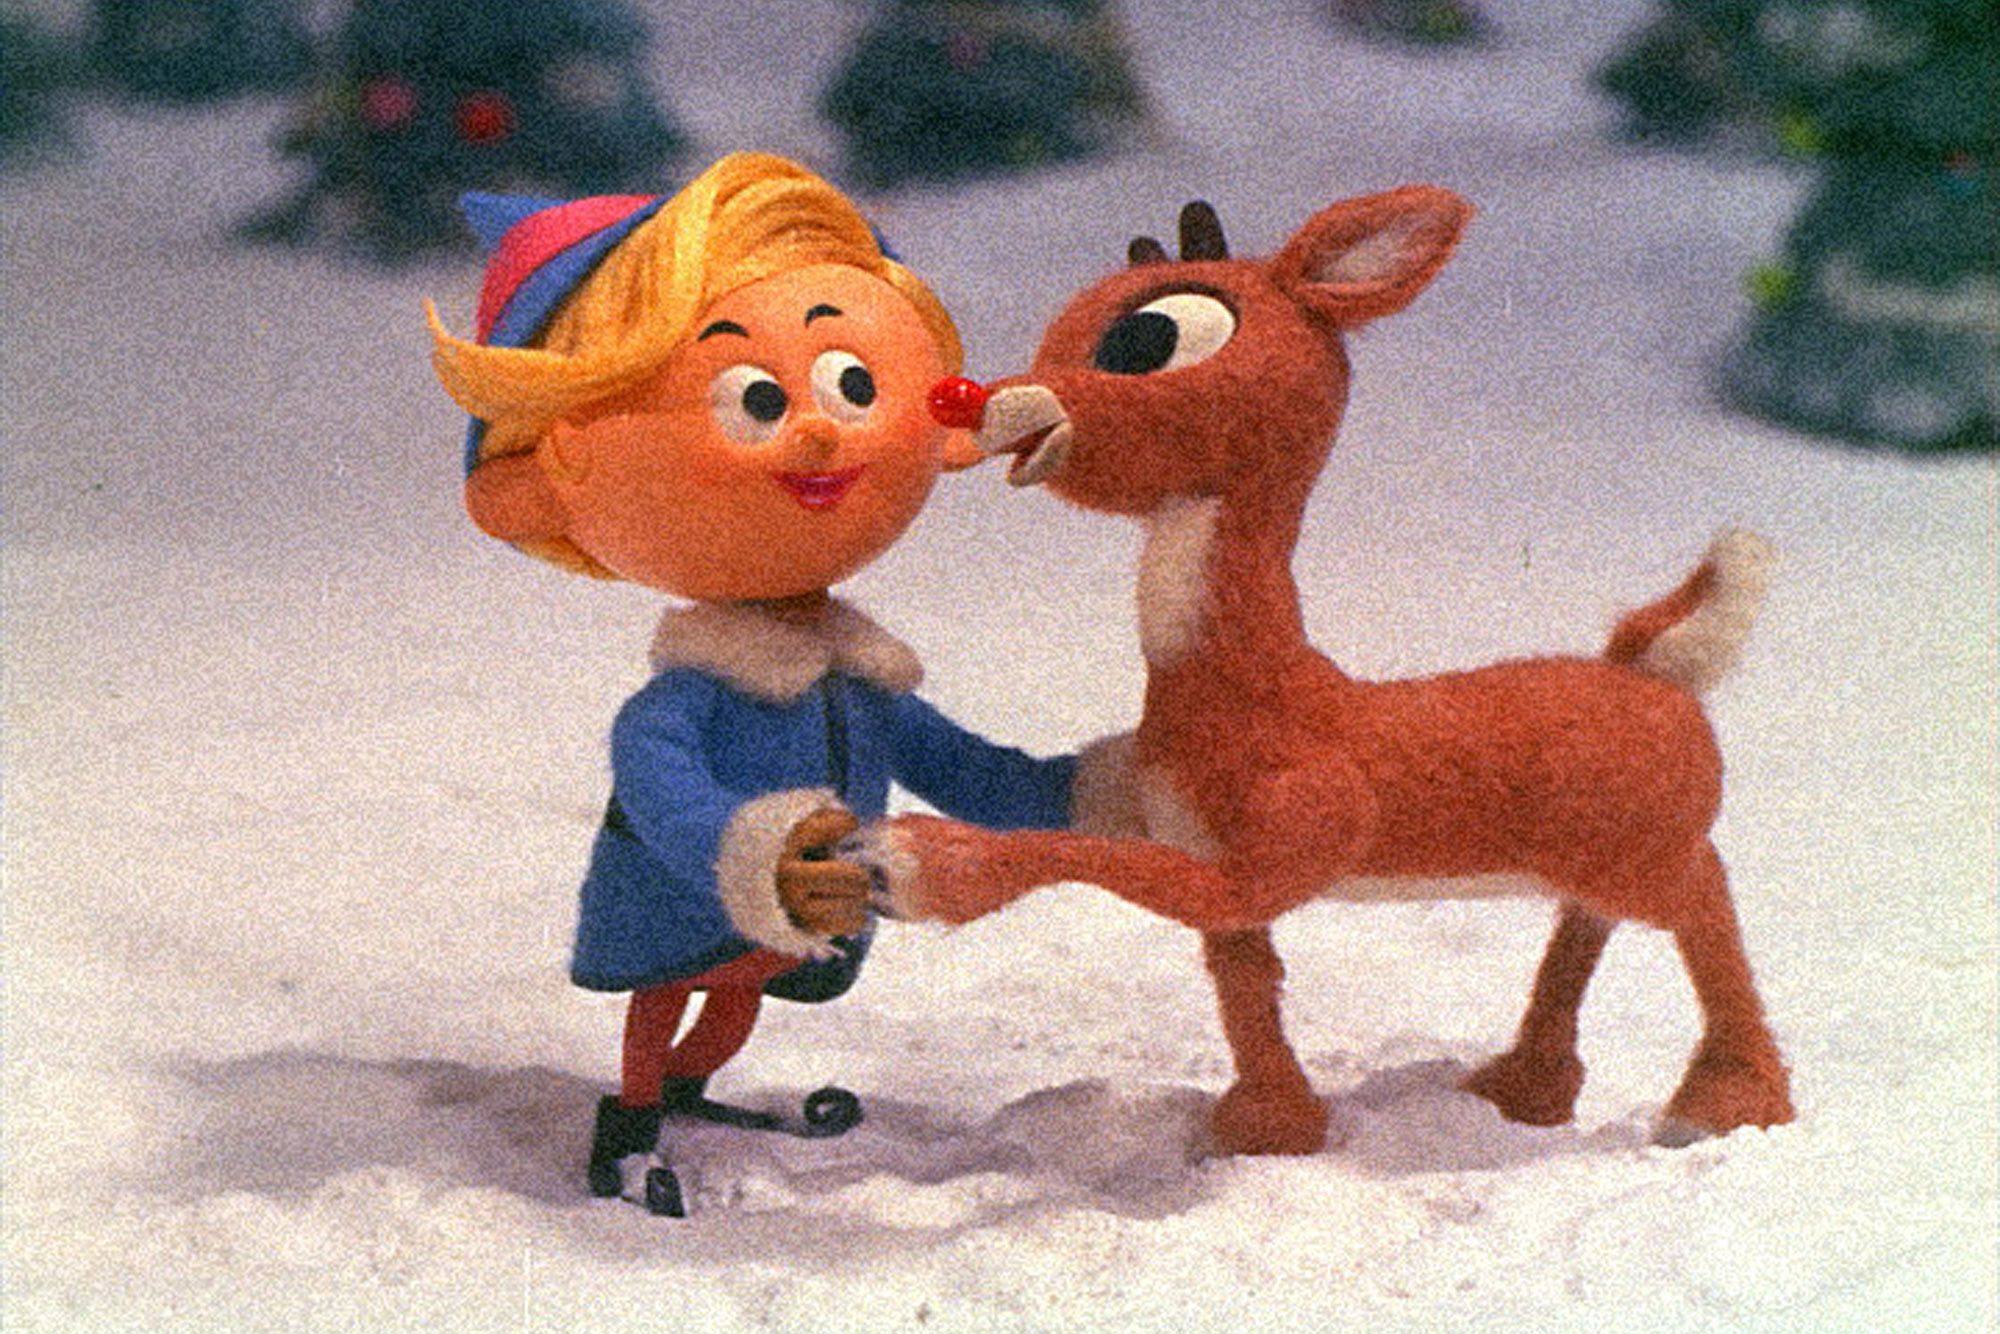 Take The Cue From Rudolph; Lean Into The New 12 months…